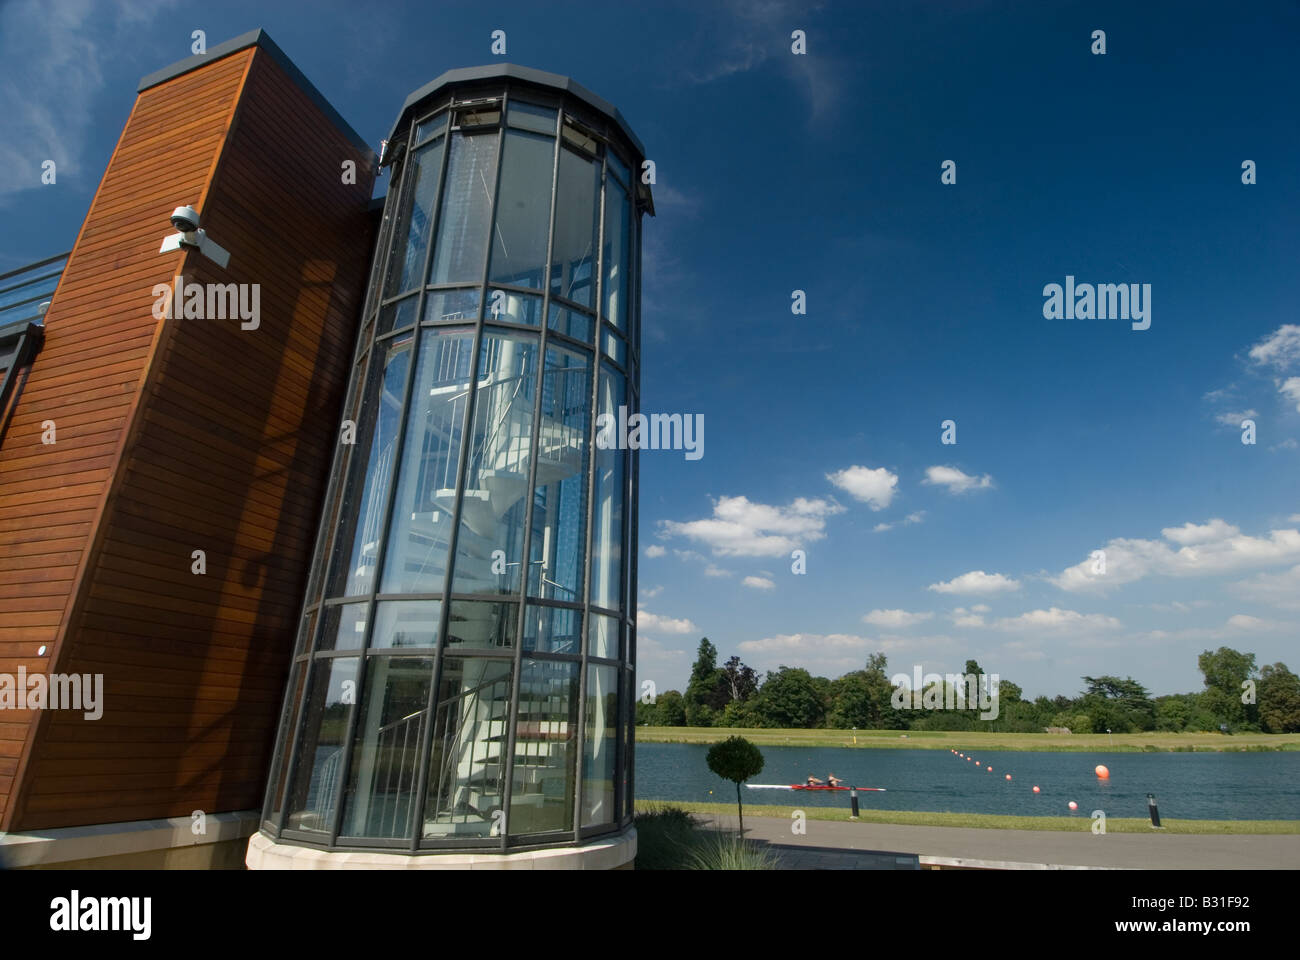 The Eton Suite and finishing tower at Dorney Lake Rowing Centre near Windsor Stock Photo